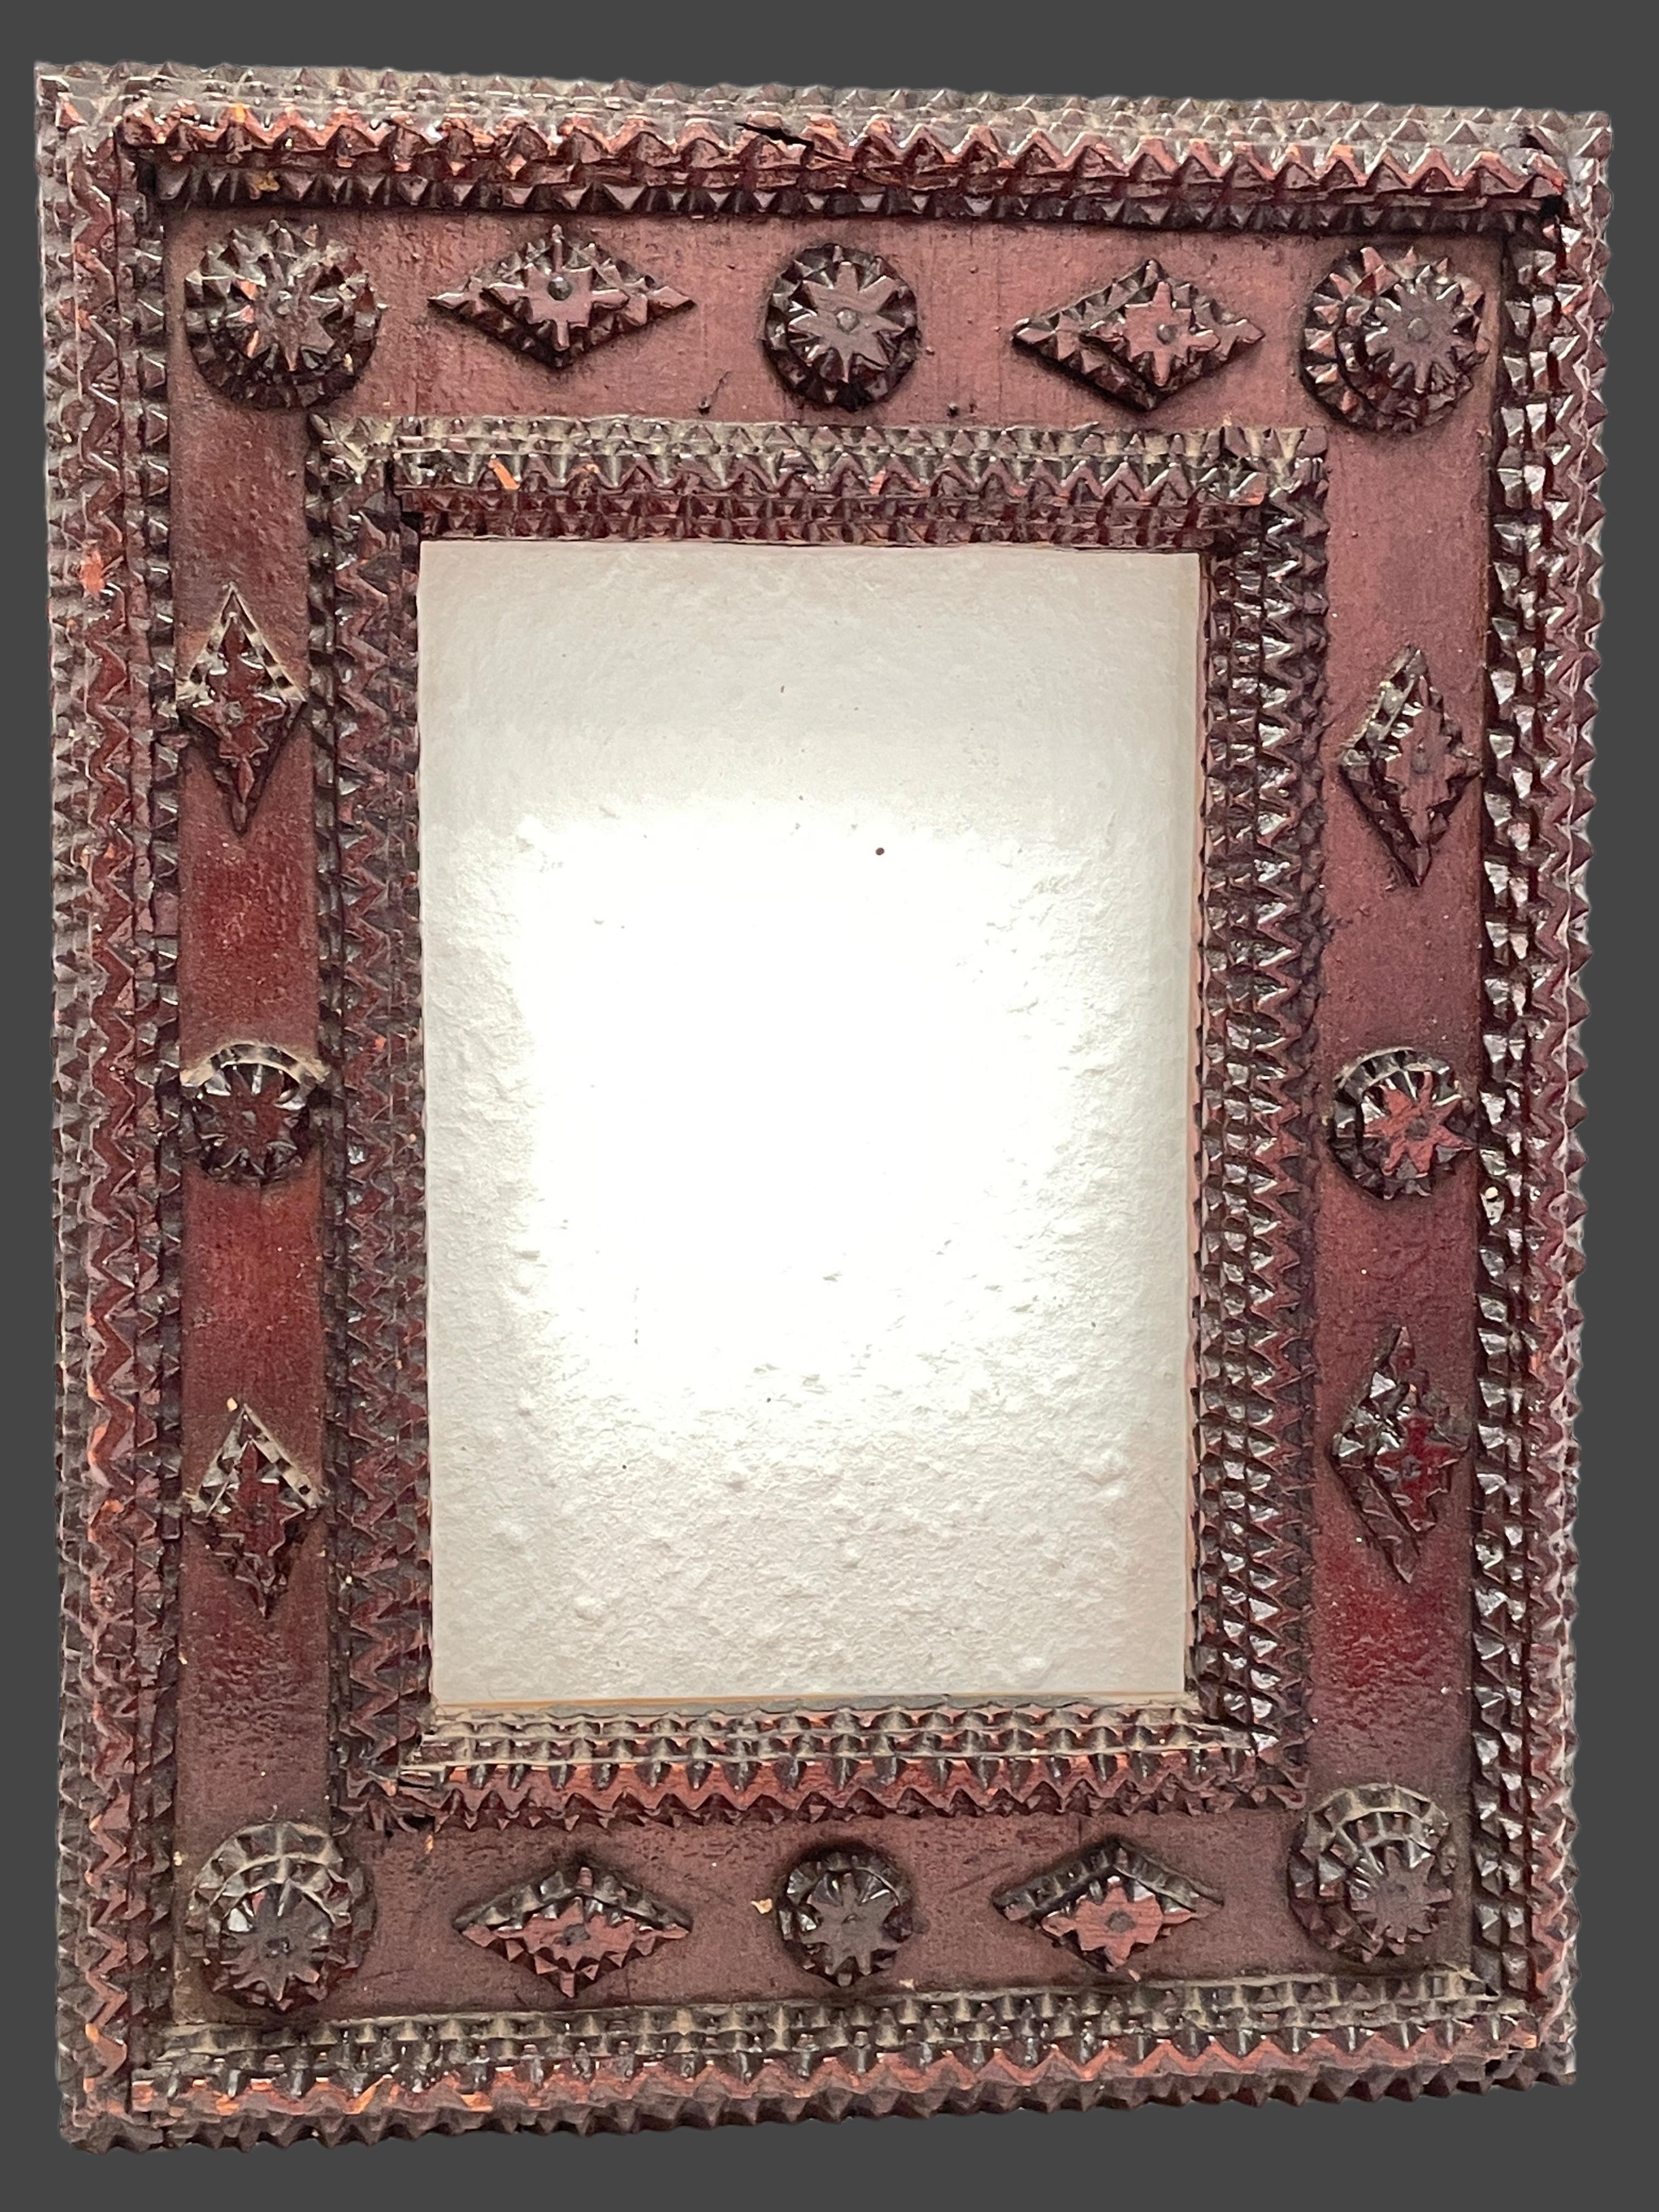 A petite German late 19th century Tramp Folk Art frame. This petite Tramp Art frame, circa 1880 comes from Germany and features a finely carved frame surrounding an original glass.
Viewable picture size is approx. 7